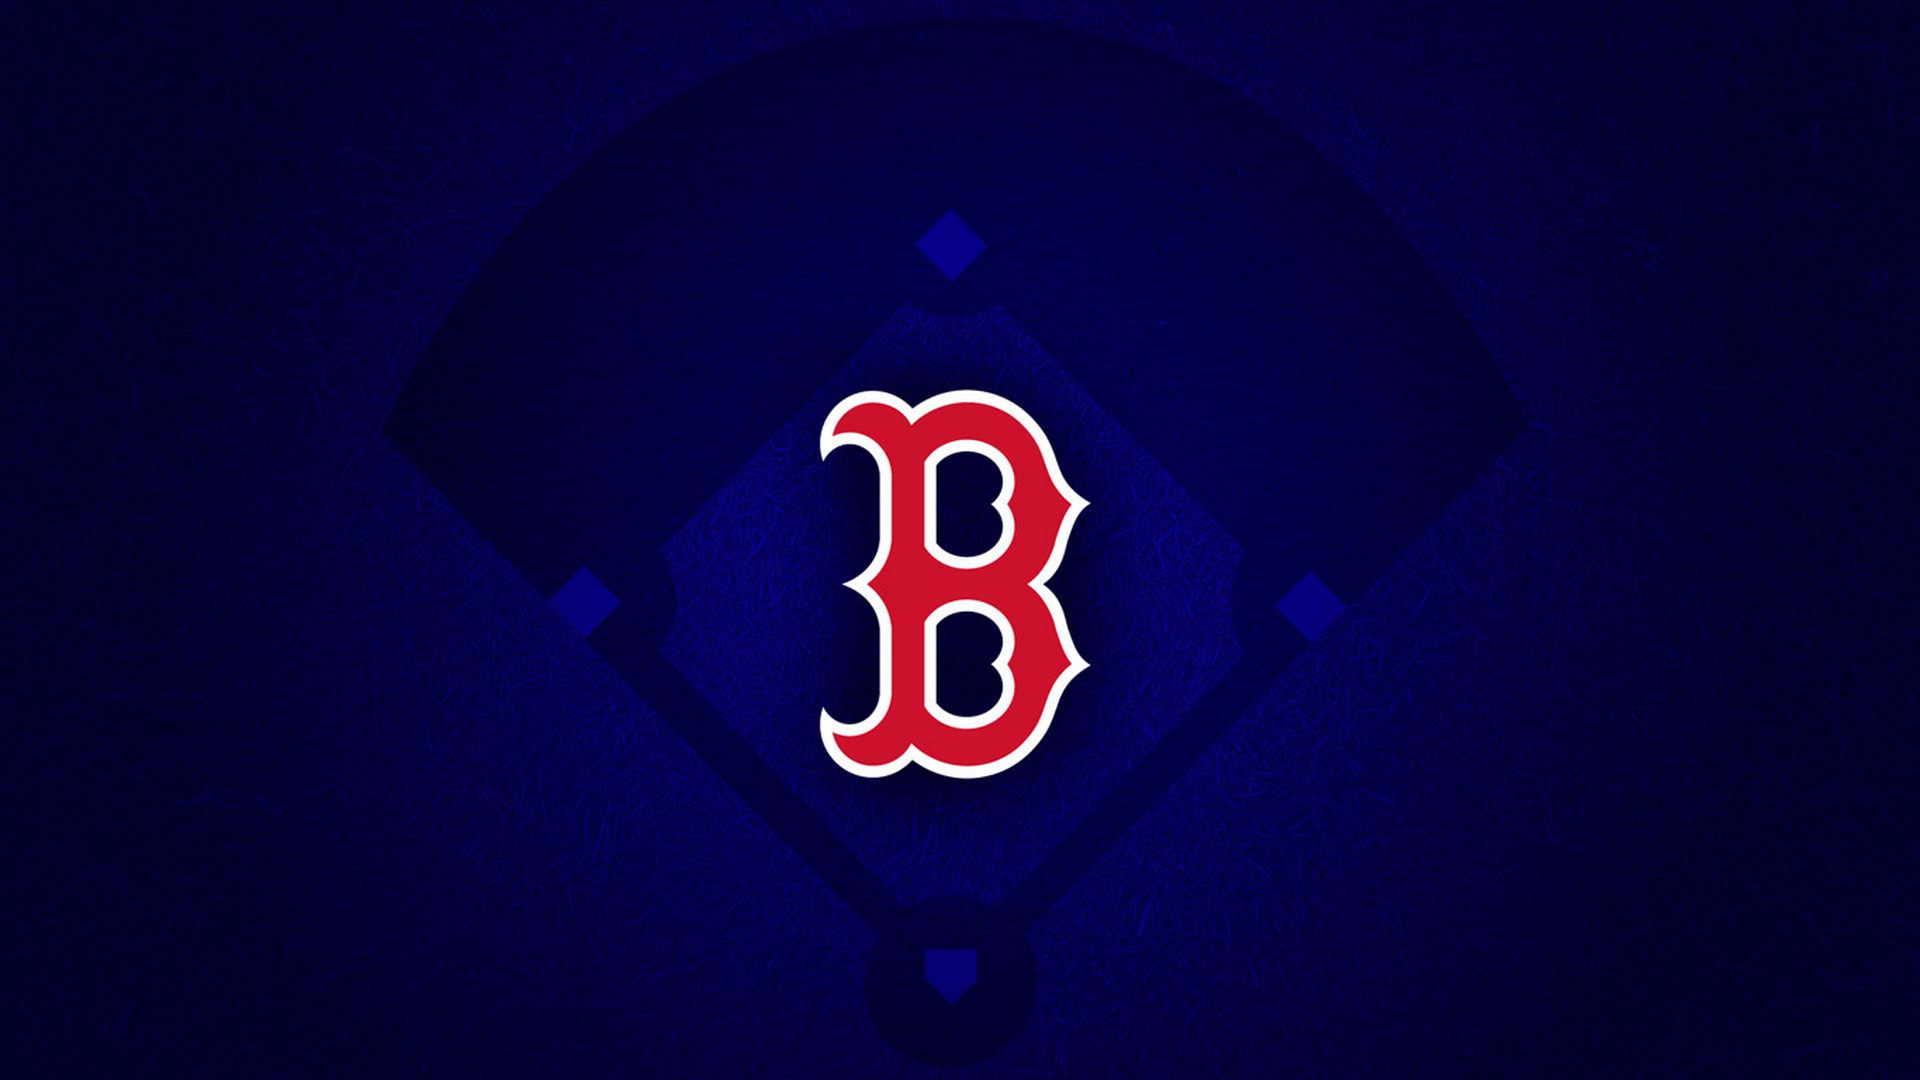 Wallpapers HD Boston Red Sox with high-resolution 1920x1080 pixel. You can use this wallpaper for Mac Desktop Wallpaper, Laptop Screensavers, Android Wallpapers, Tablet or iPhone Home Screen and another mobile phone device